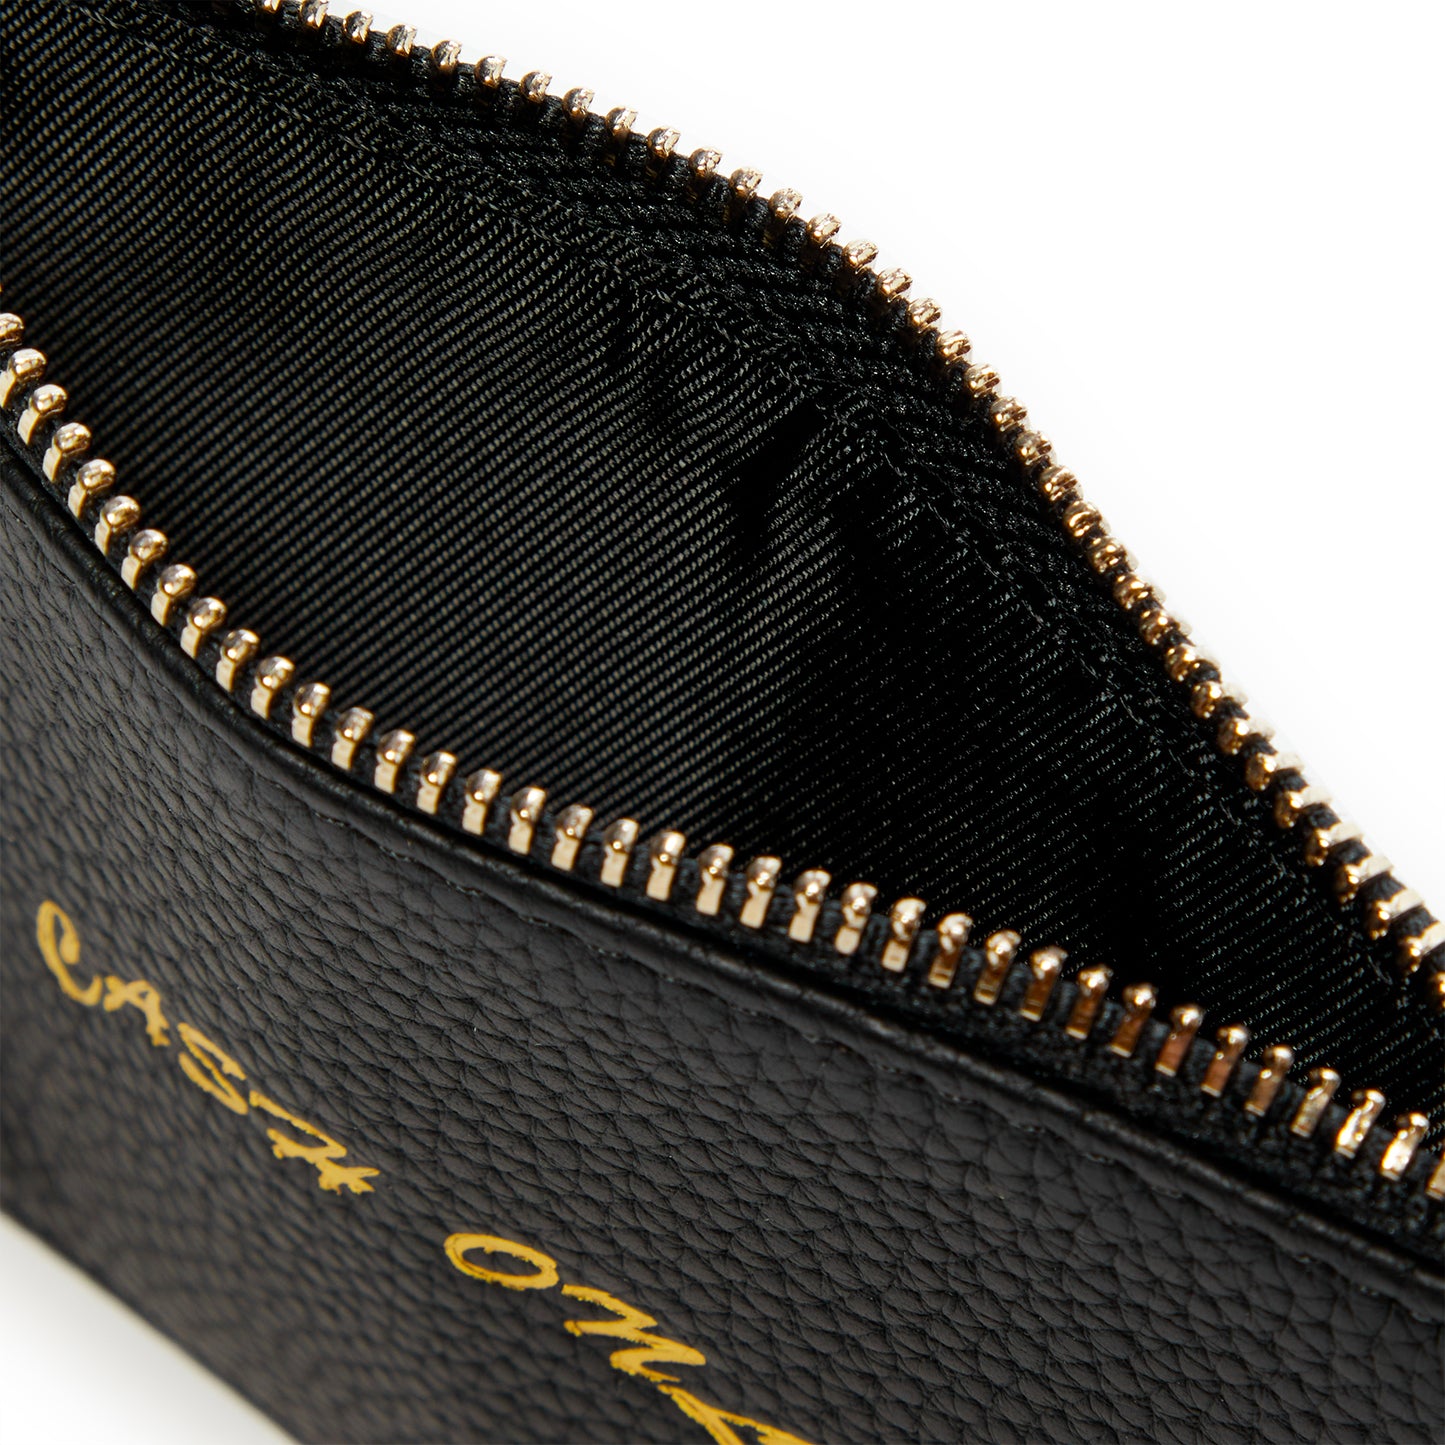 Cash Only Leather Zip Wallet (Black)